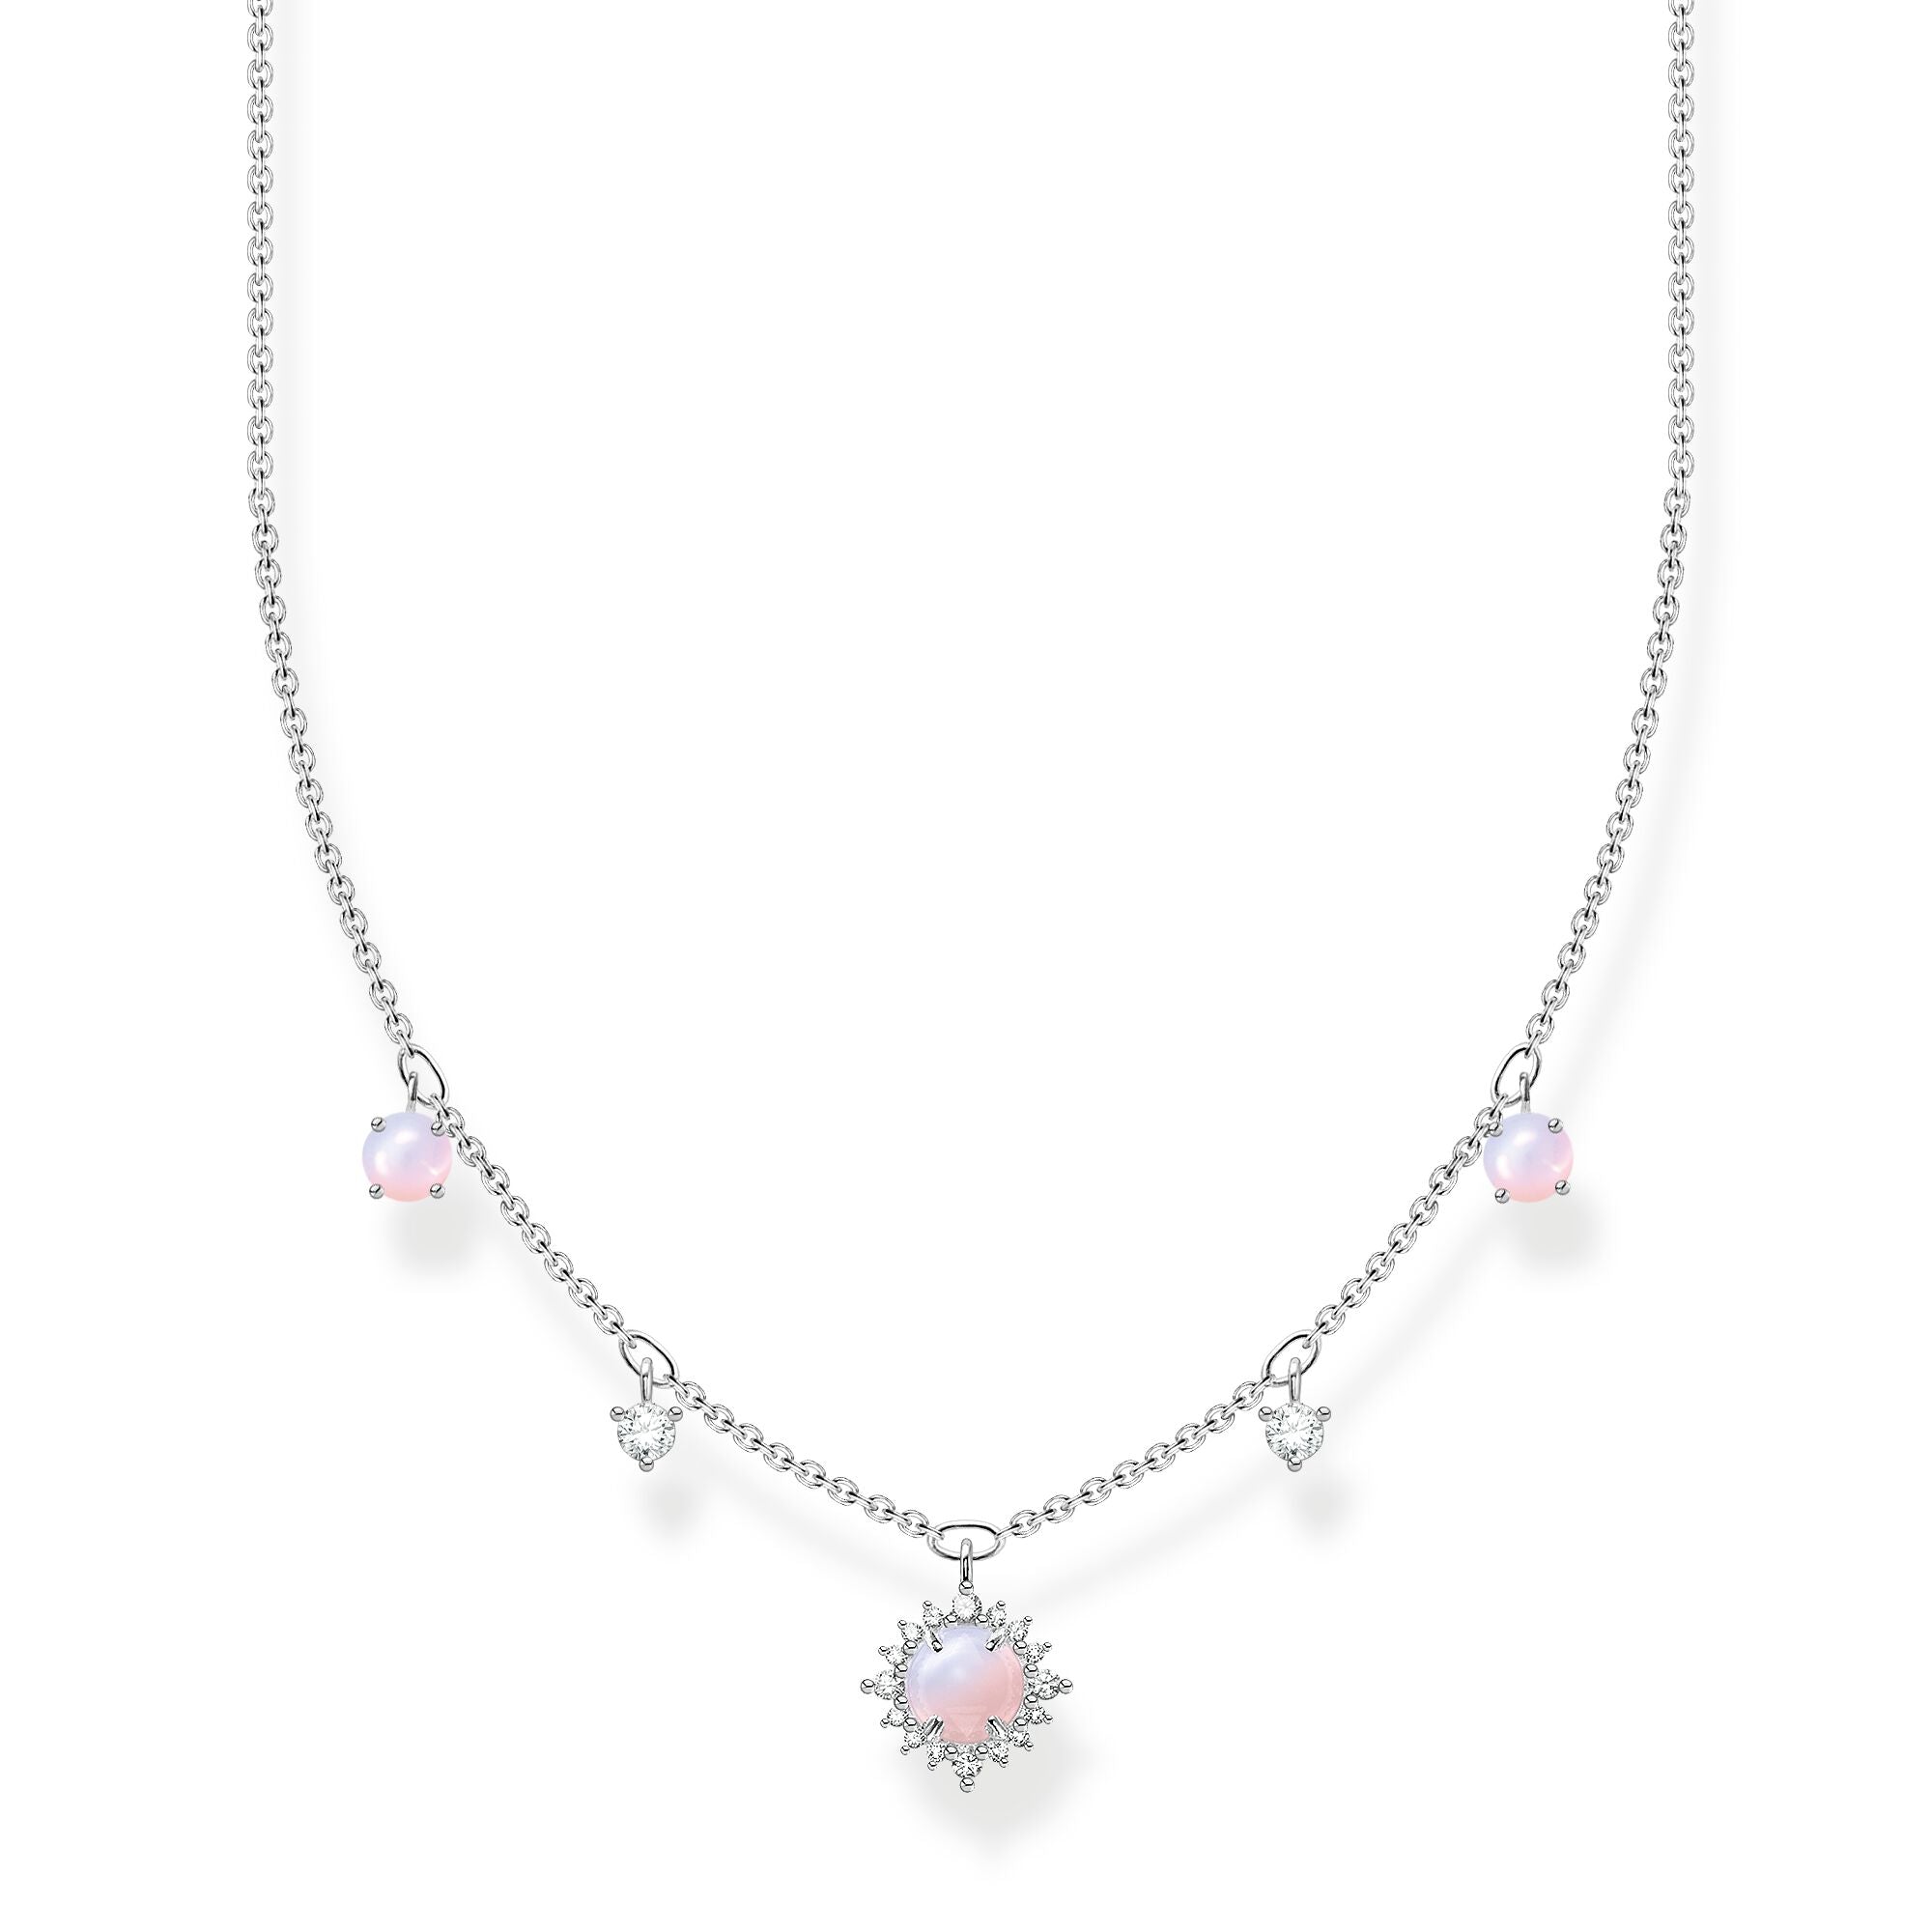 Thomas Sabo sterling silver and pink opal effect, white stone accent dangles, adjustable necklace